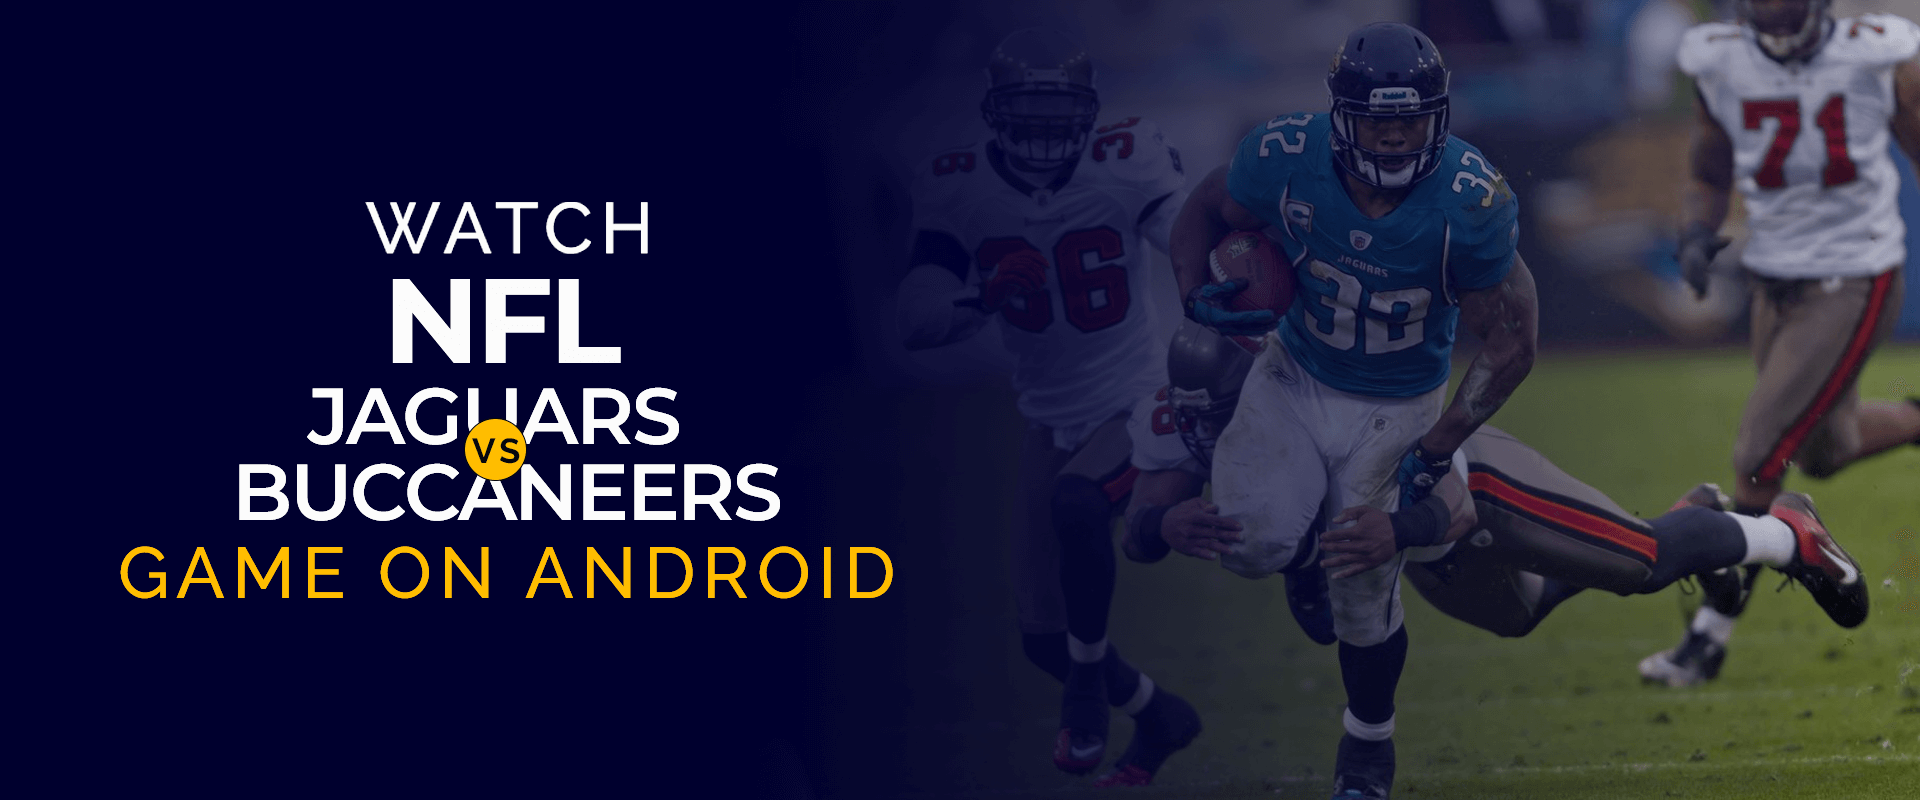 Watch NFL Jaguars Vs Buccaneers Game On Android